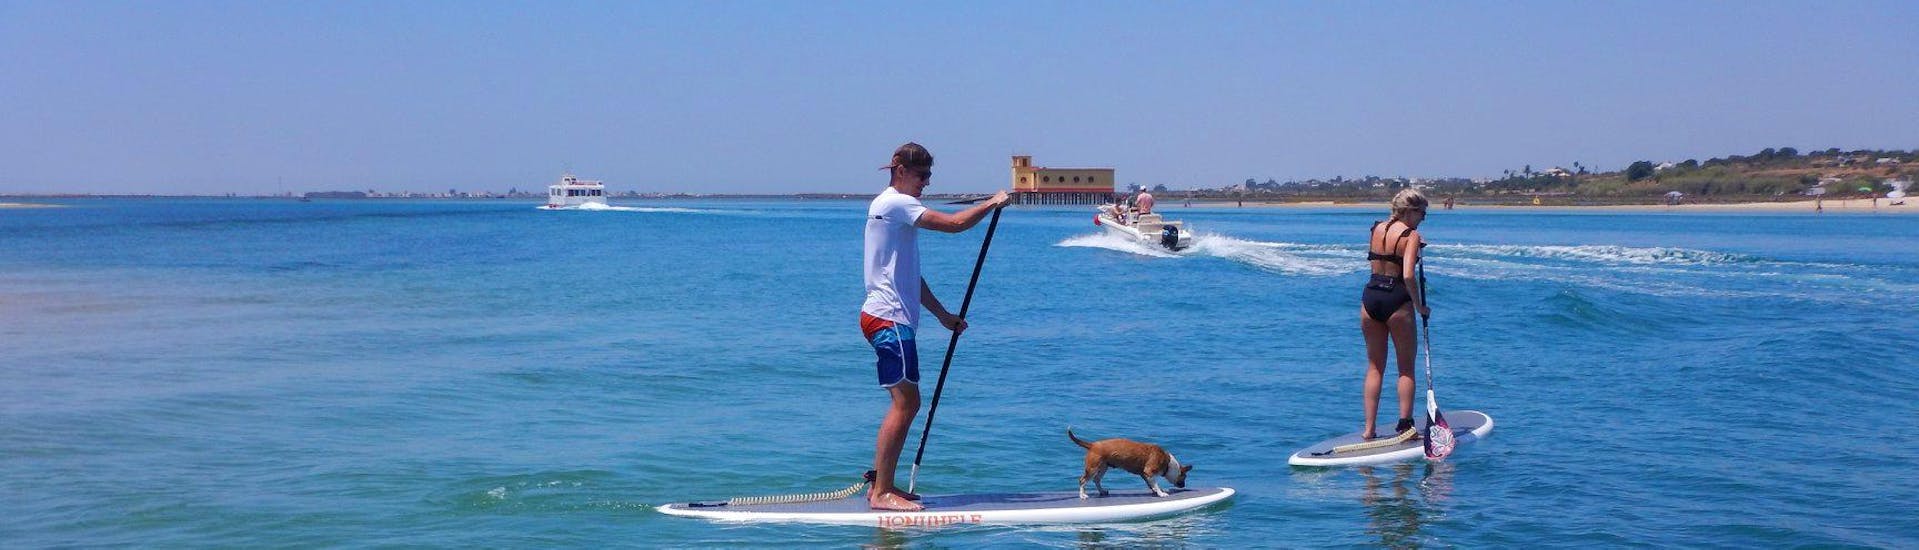 A couple is exploring the lagoon together with their dog during their SUP Rental at Praia da Fuseta organized by Kite Culture Algarve.